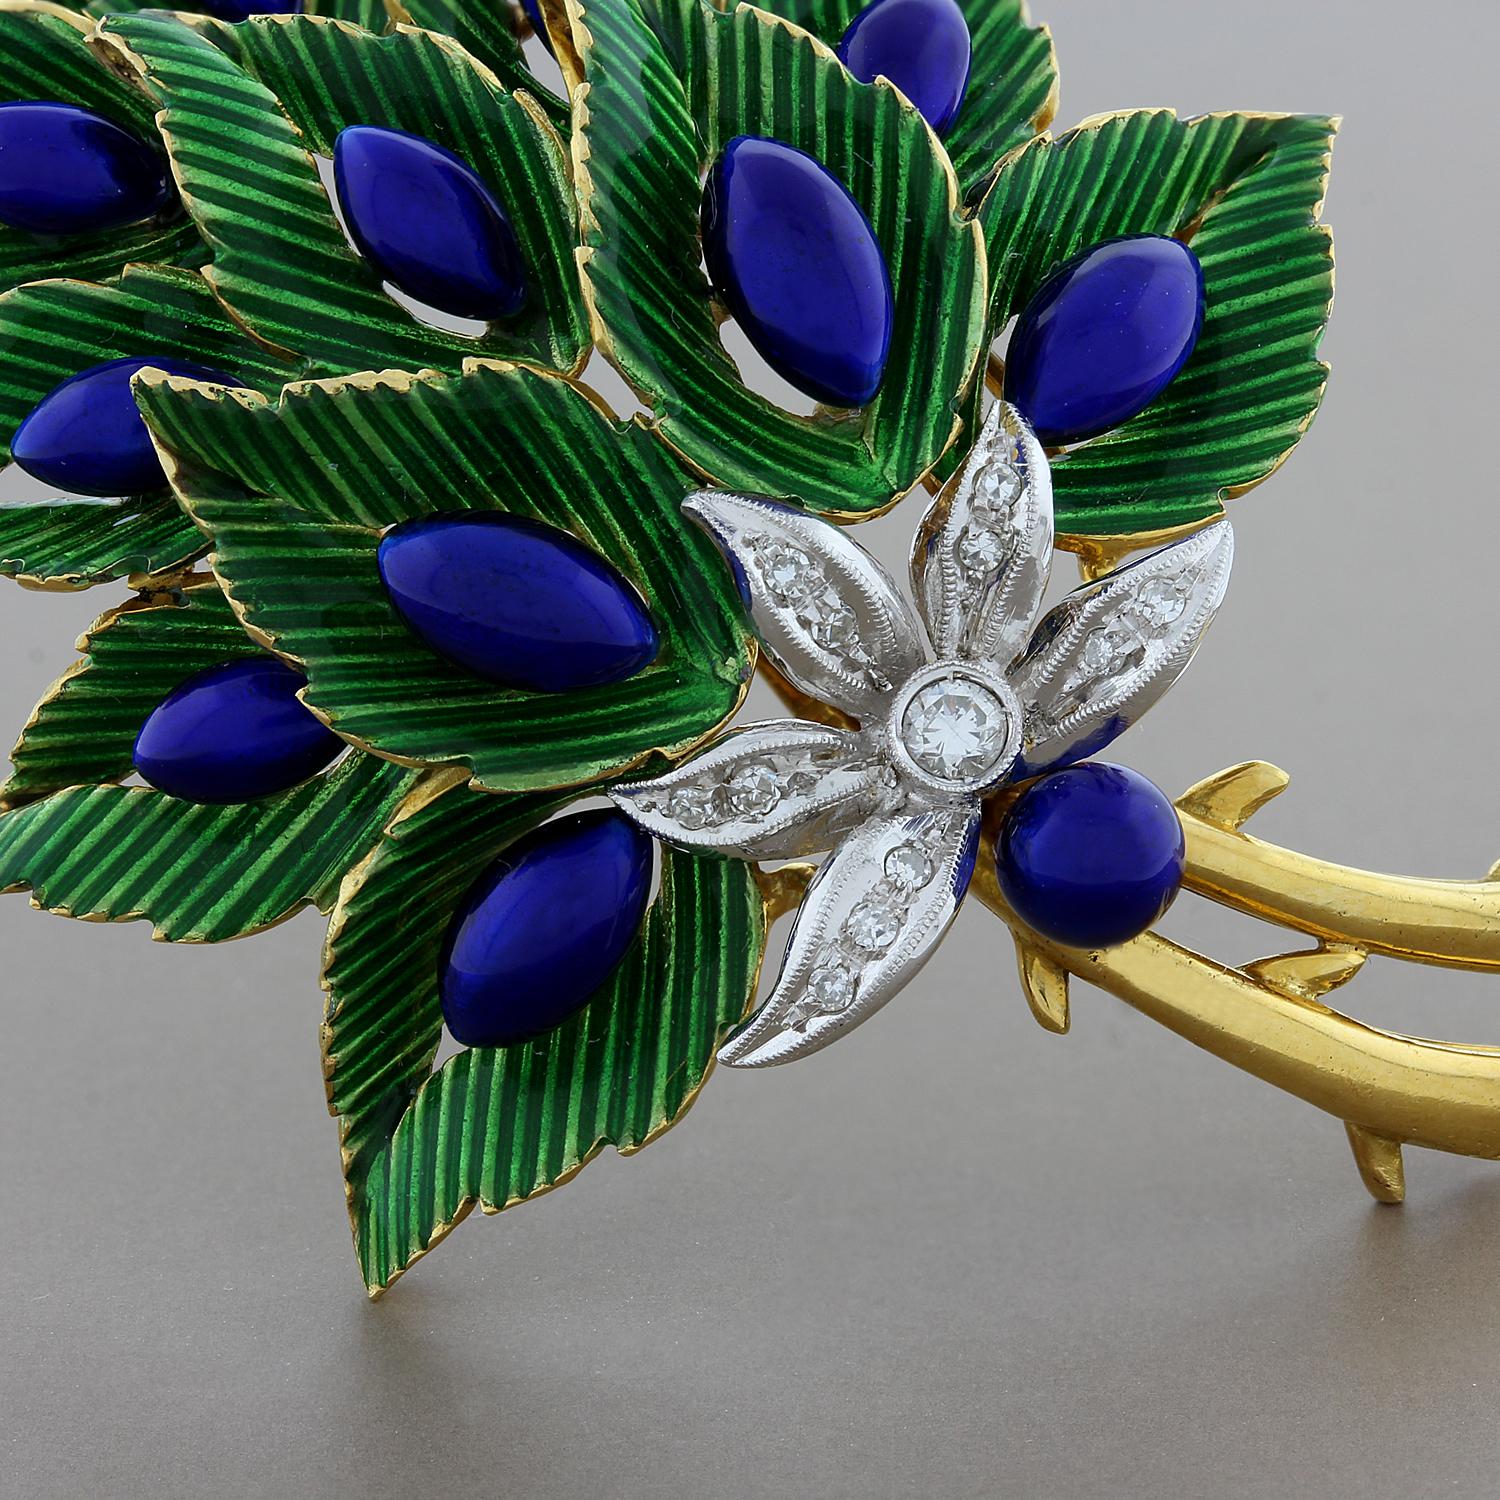 An admirable brooch by Italian designer Toliro. Each leaf of the 18K yellow gold bouquet is hand painted with vibrant green and blue enamel. Tying the bouquet together is a flower of made of 18K white gold with 0.17 carats of VS quality diamonds. 